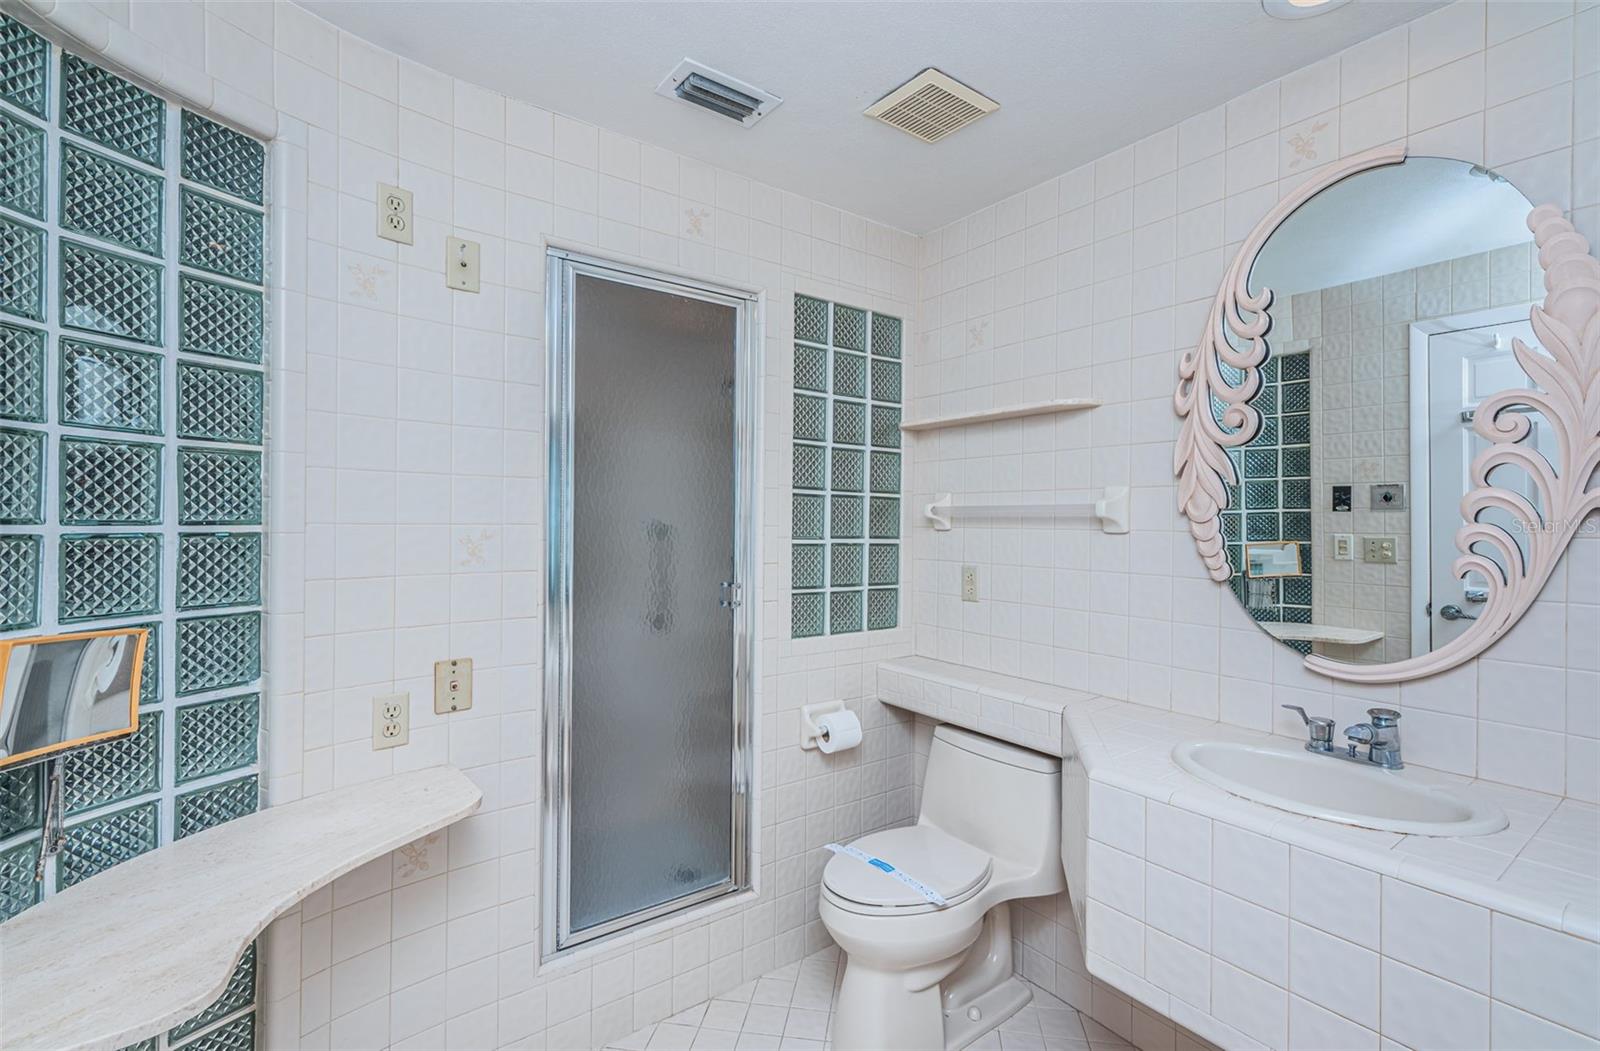 Enjoy comfort and style in the master bathroom of this exceptional property! It features a mirror for your daily routines, a luxurious makeup counter, and a conveniently placed single sink that blends practicality with elegant design.